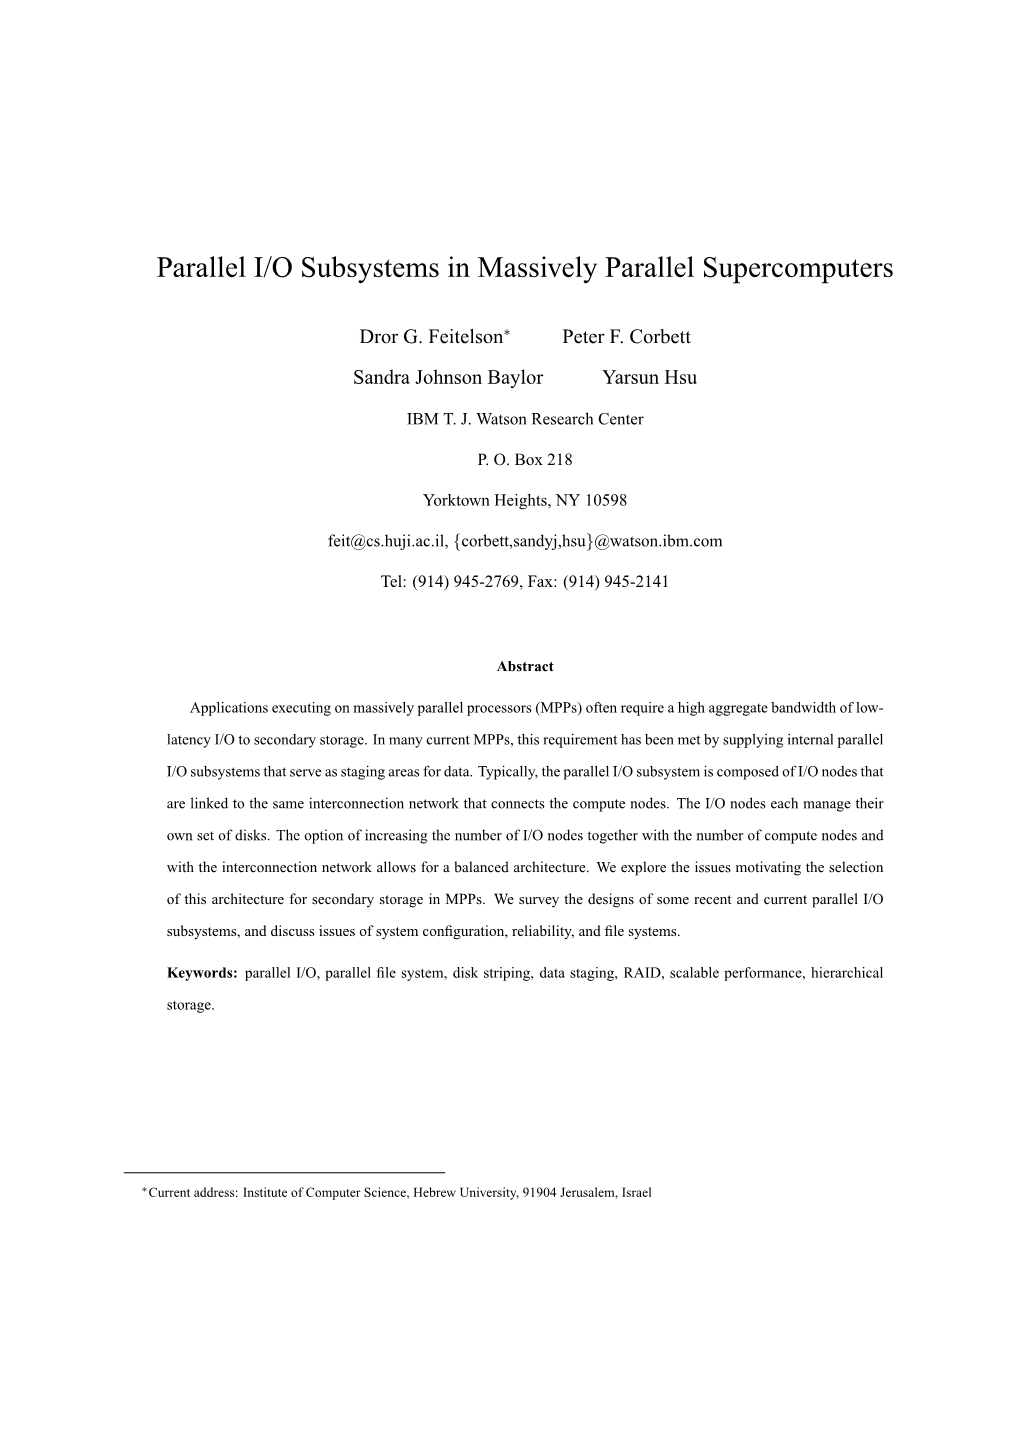 Parallel I/O Subsystems in Massively Parallel Supercomputers